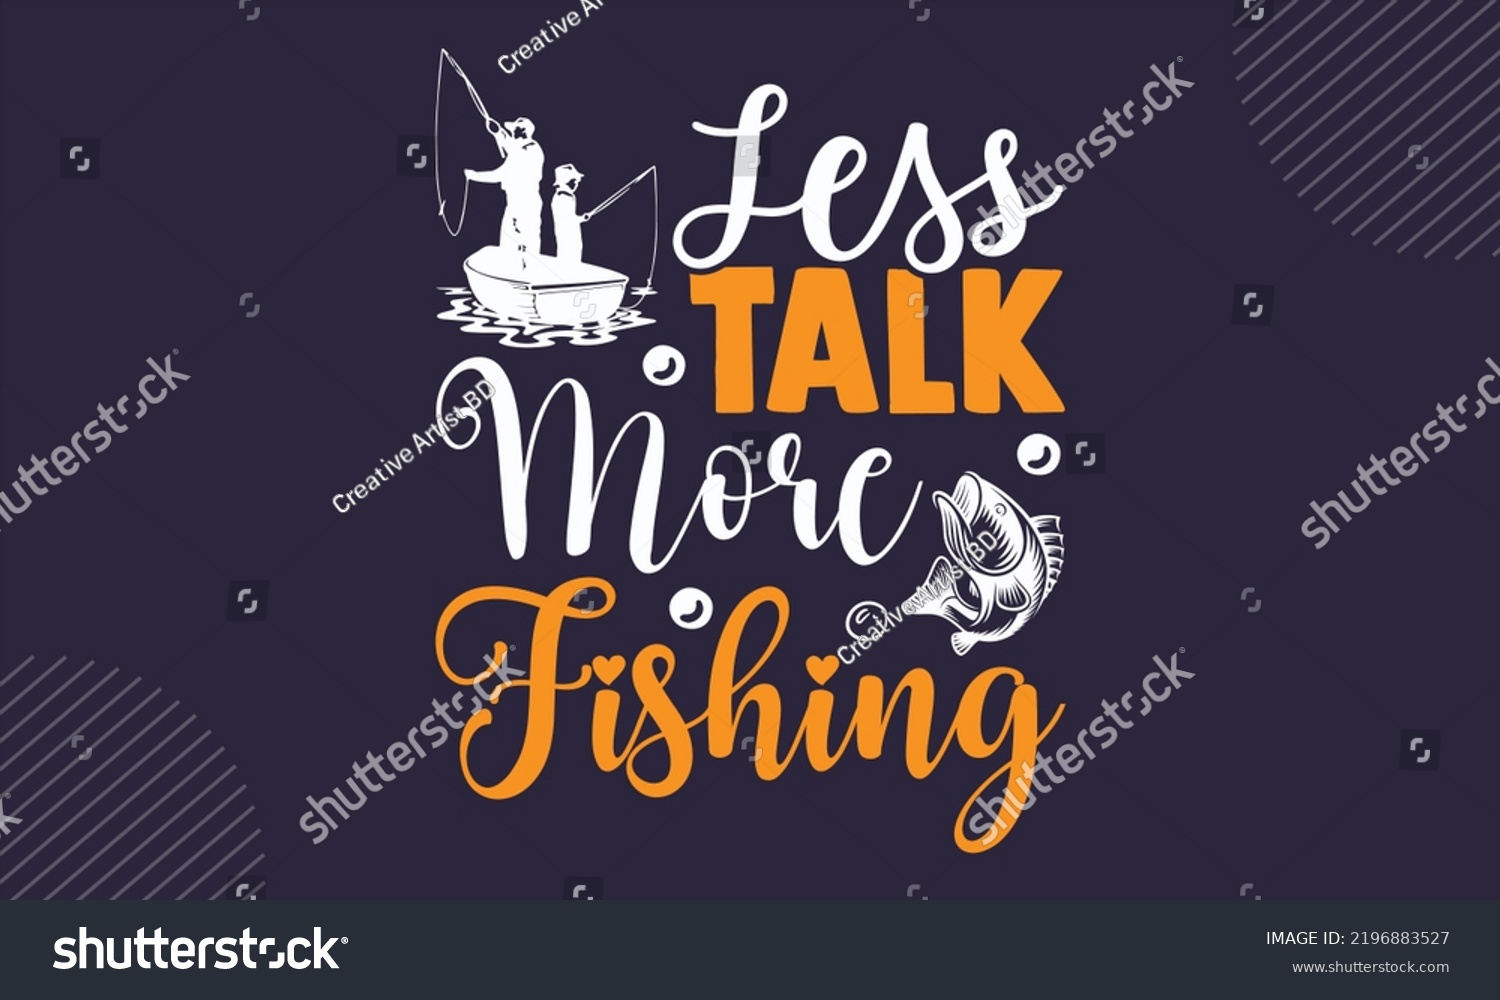 SVG of Less Talk More Fishing - Fishing T shirt Design, Hand drawn vintage illustration with hand-lettering and decoration elements, Cut Files for Cricut Svg, Digital Download svg